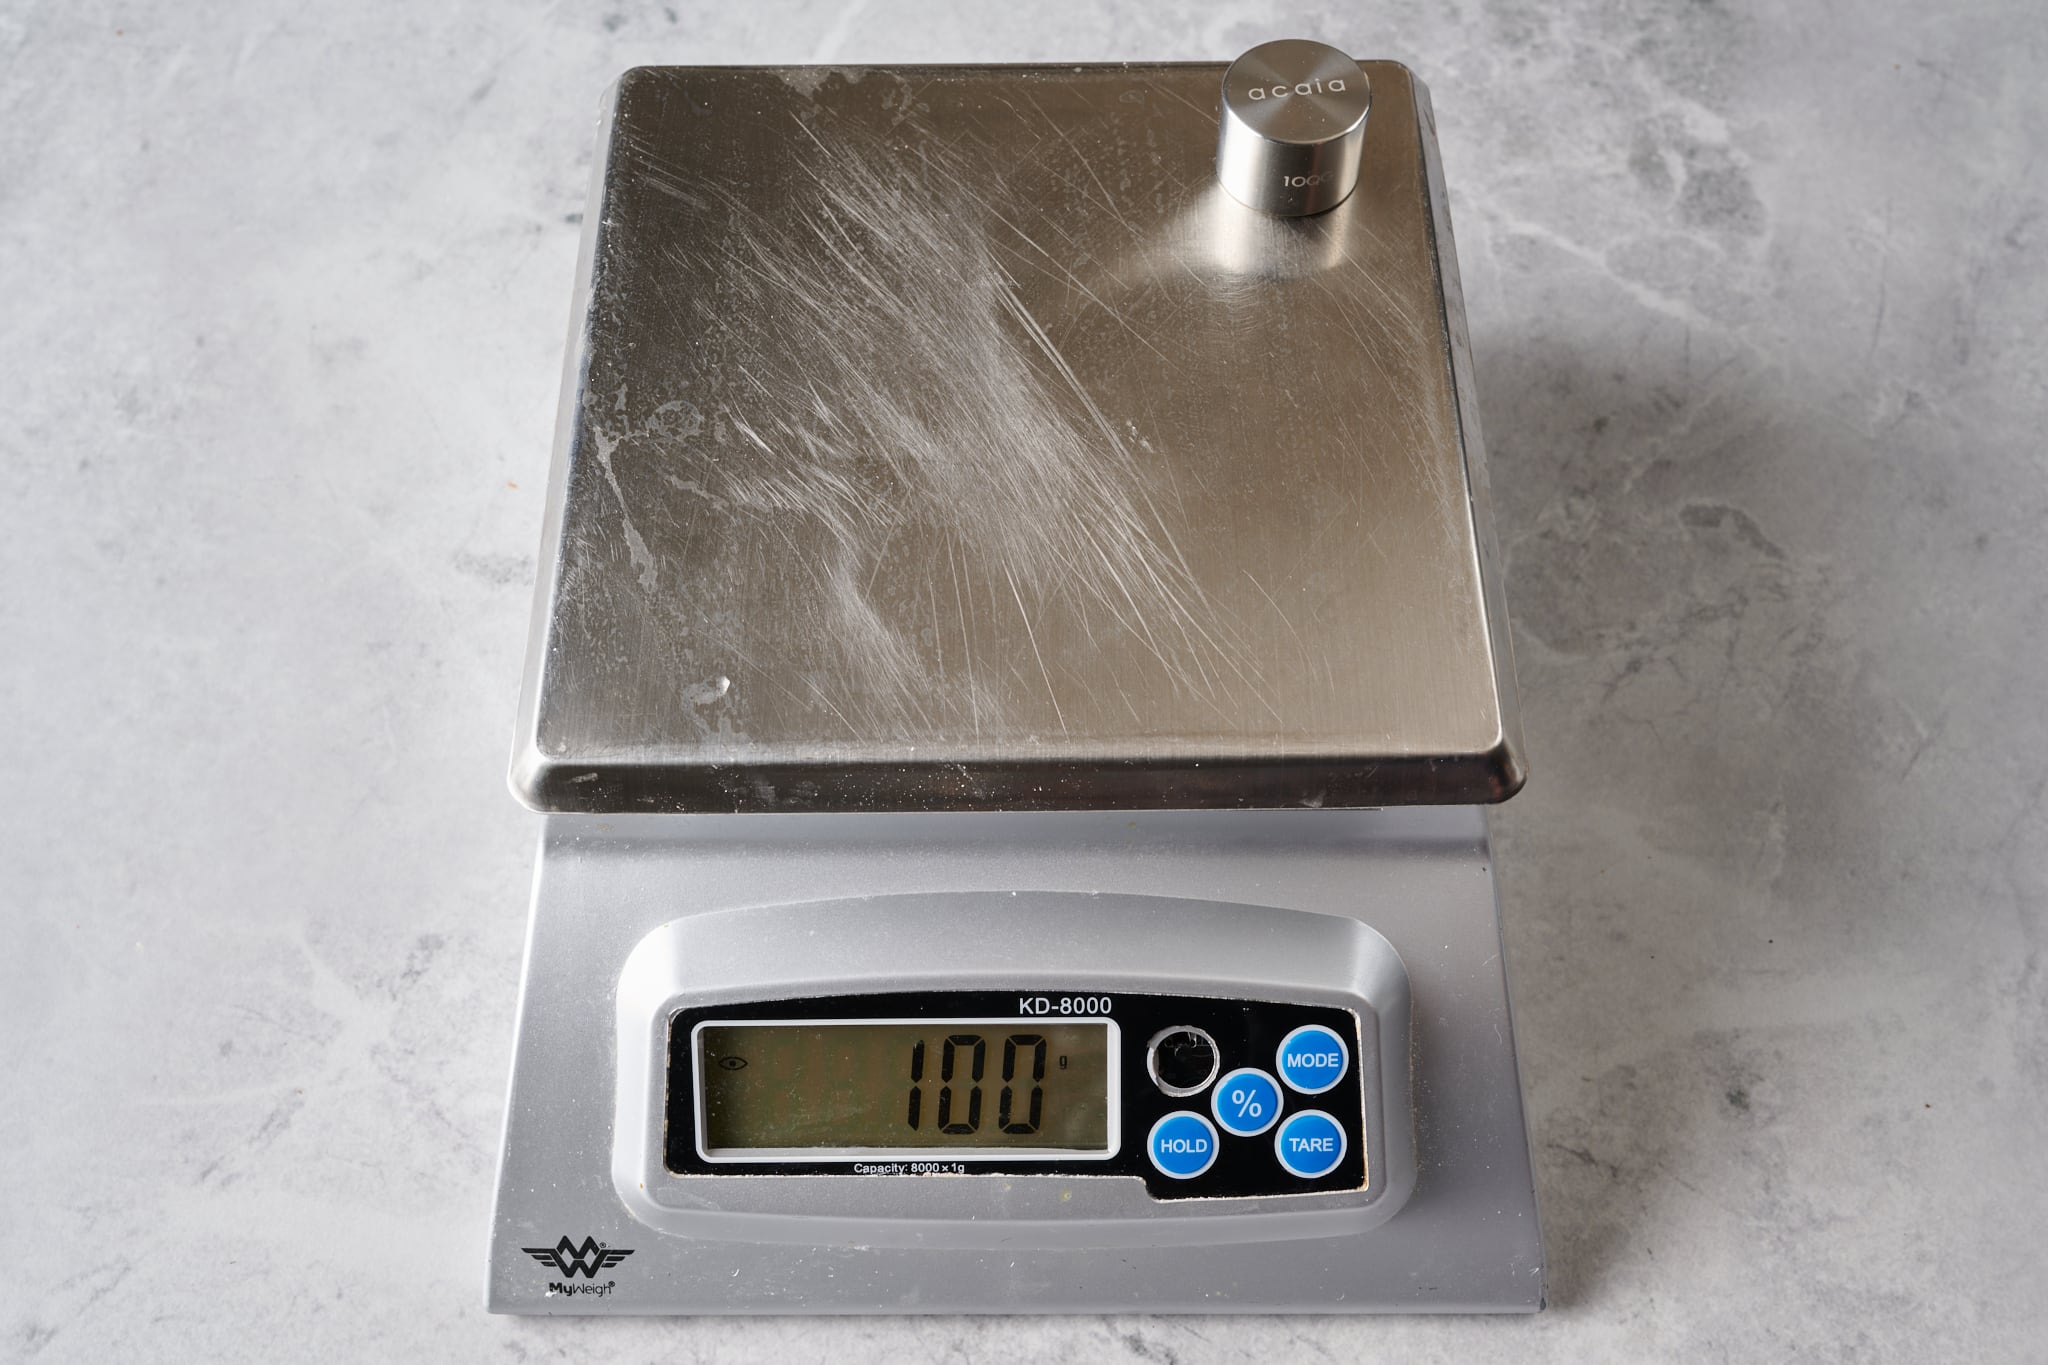 https://www.theperfectloaf.com/wp-content/uploads/2023/01/theperfectloaf_best_kitchen_scale_for_making_bread-4.jpg